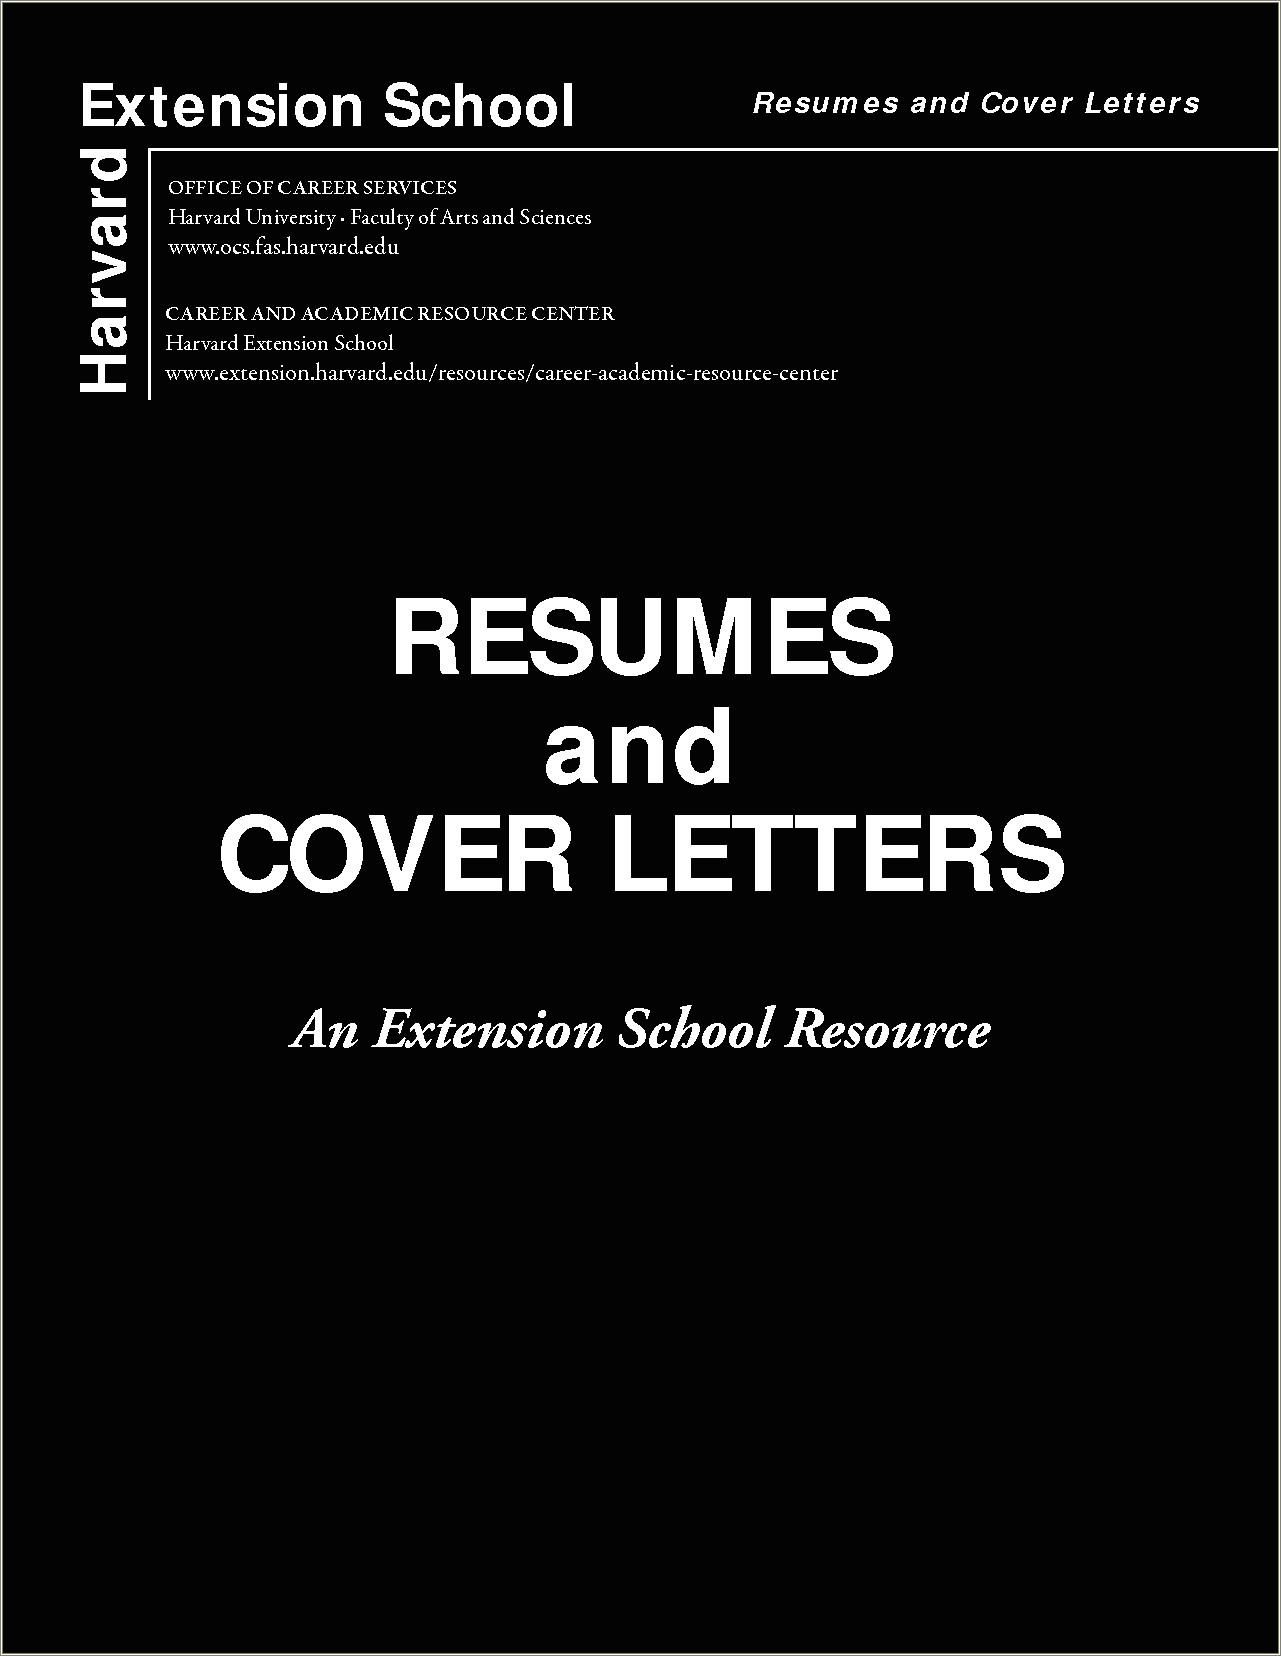 Harvard Resume And Cover Letter Guide